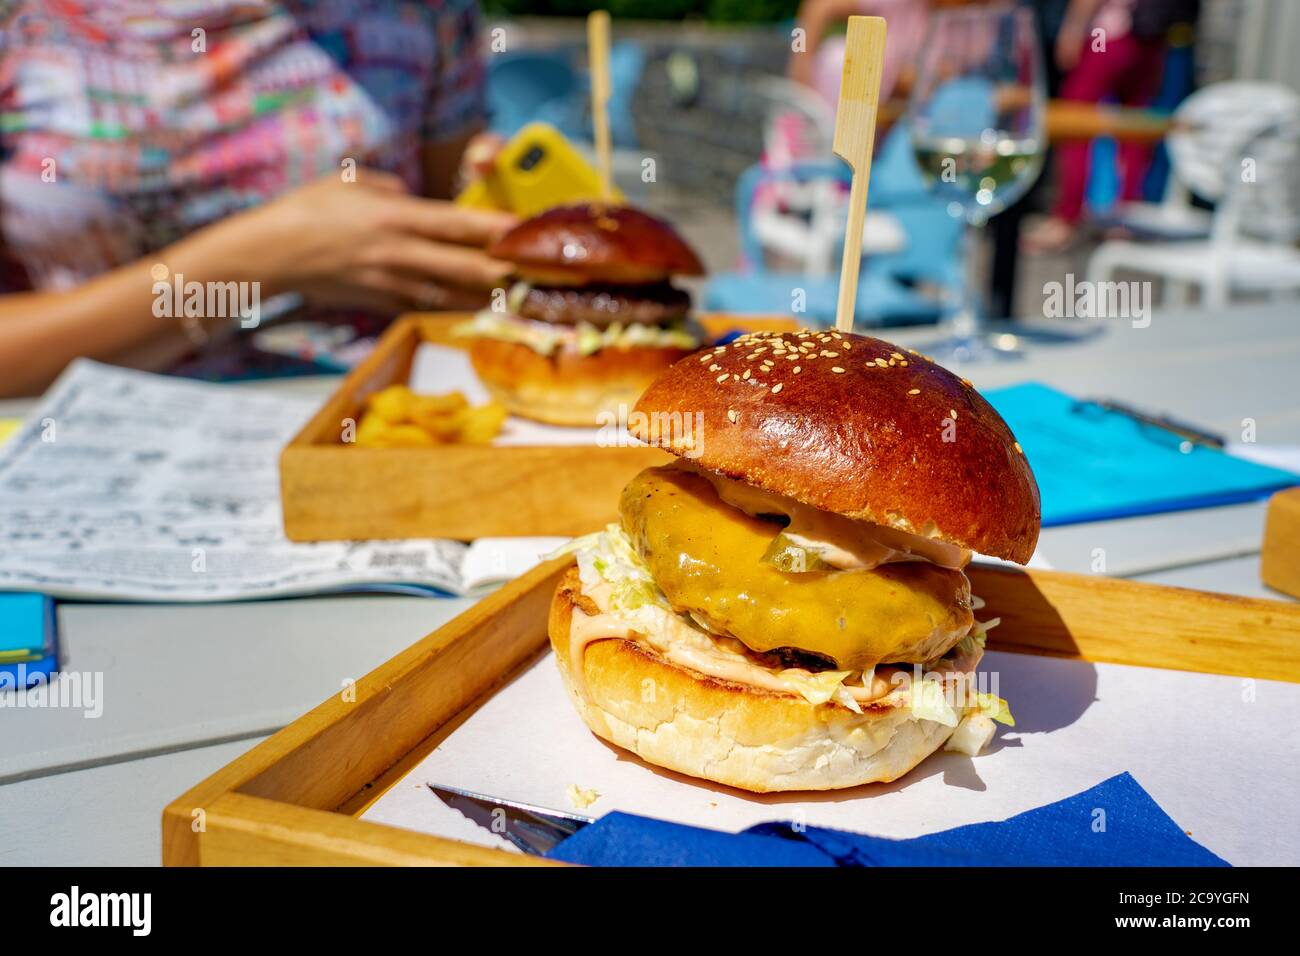 Eating burger on social event with friends together in a restautant outdoor on a board Stock Photo